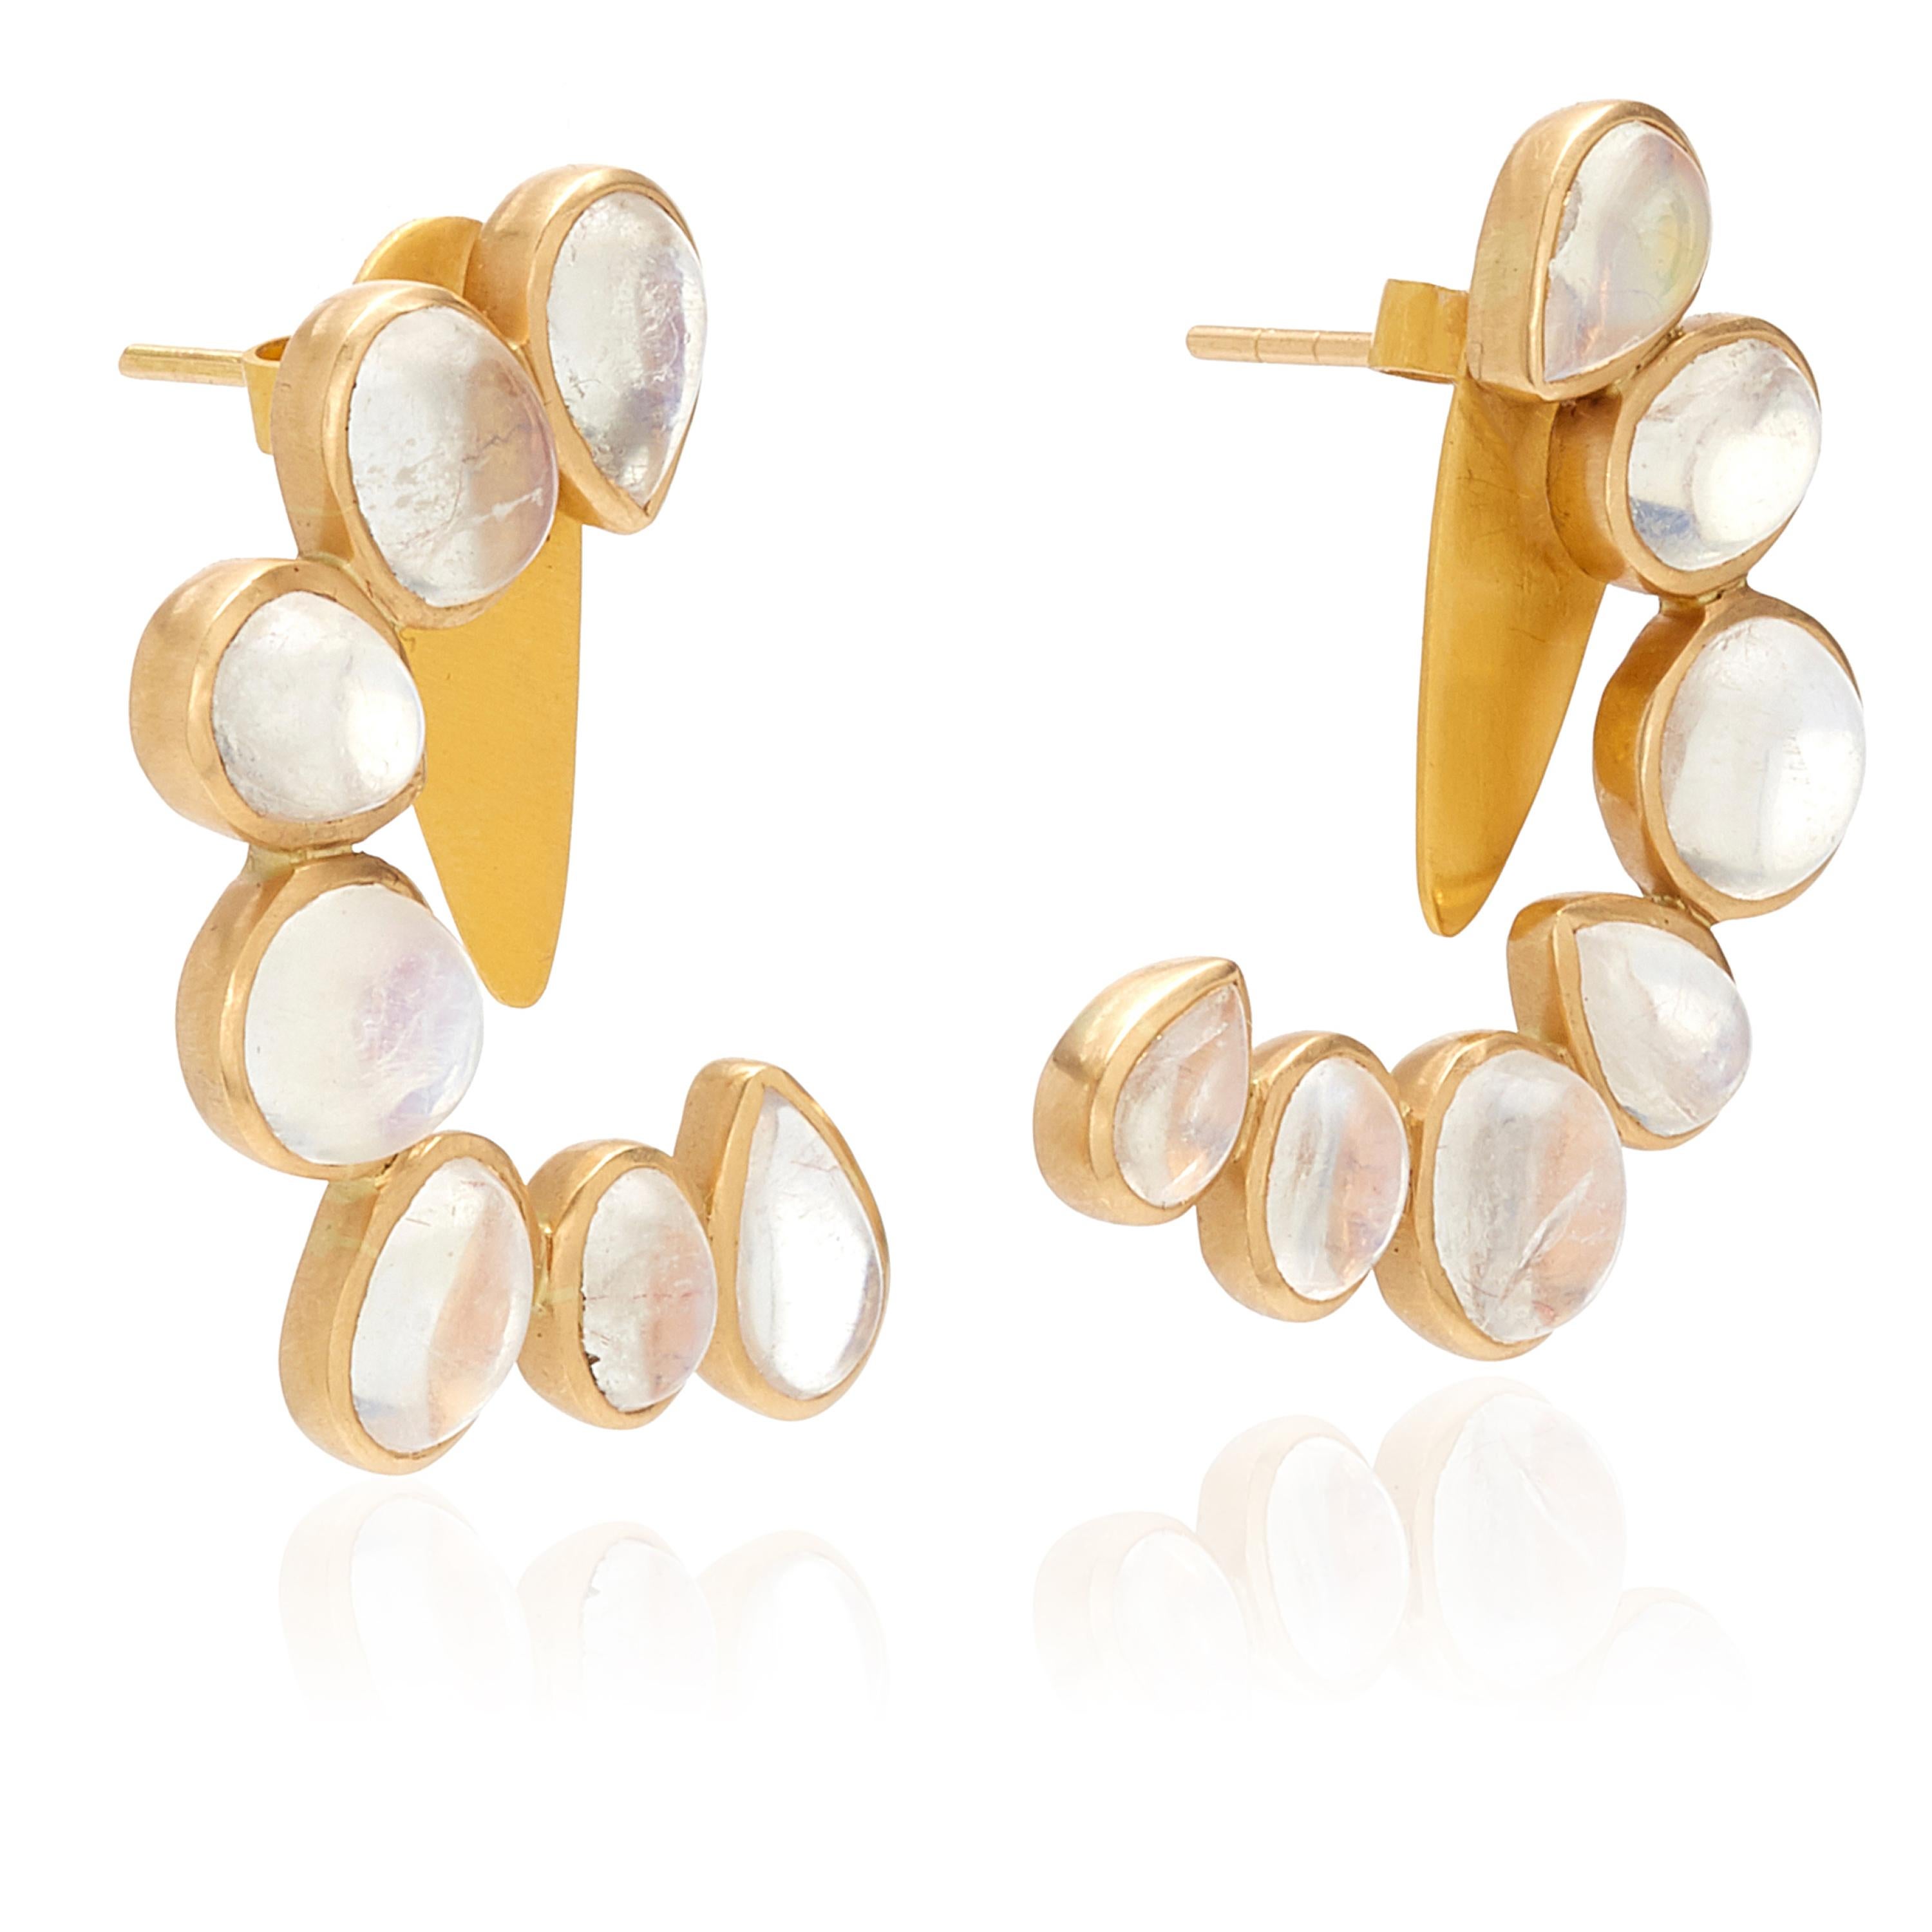 TWO BECOMES ONE
Cabochon rainbow moonstones set
in 18kt gold.

If this item is out of stock. Everything is made to order and can take 4-6 weeks.

OUROBOROS is an artisanal brand, based out of Jaipur and designed by the British designer, Olivia